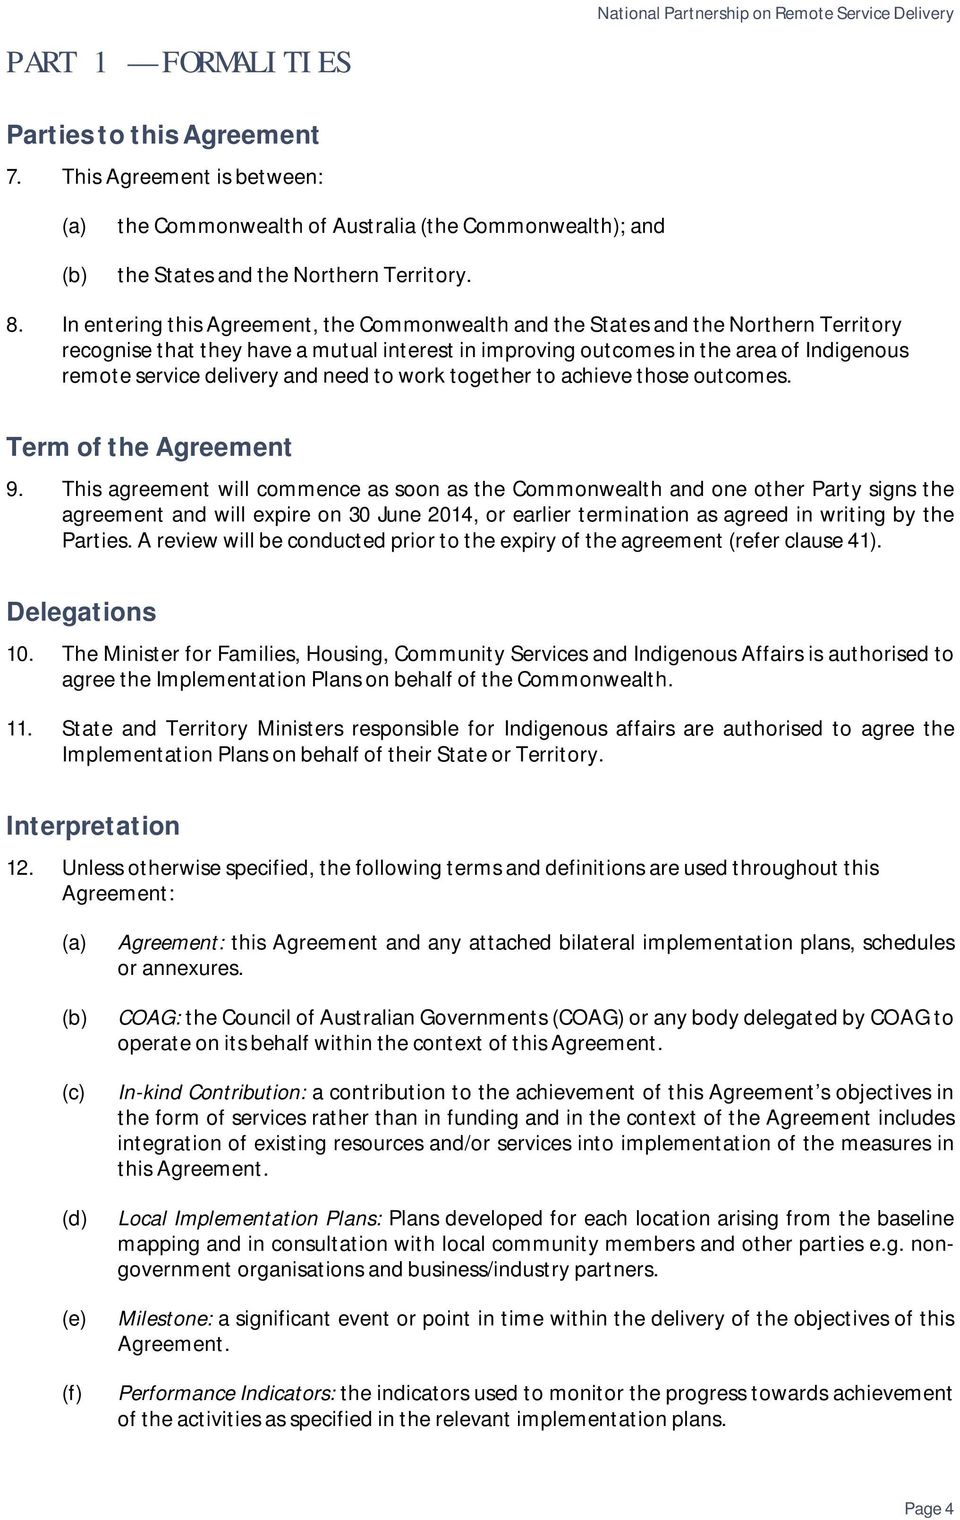 In entering this Agreement, the Commonwealth and the States and the Northern Territory recognise that they have a mutual interest in improving outcomes in the area of Indigenous remote service